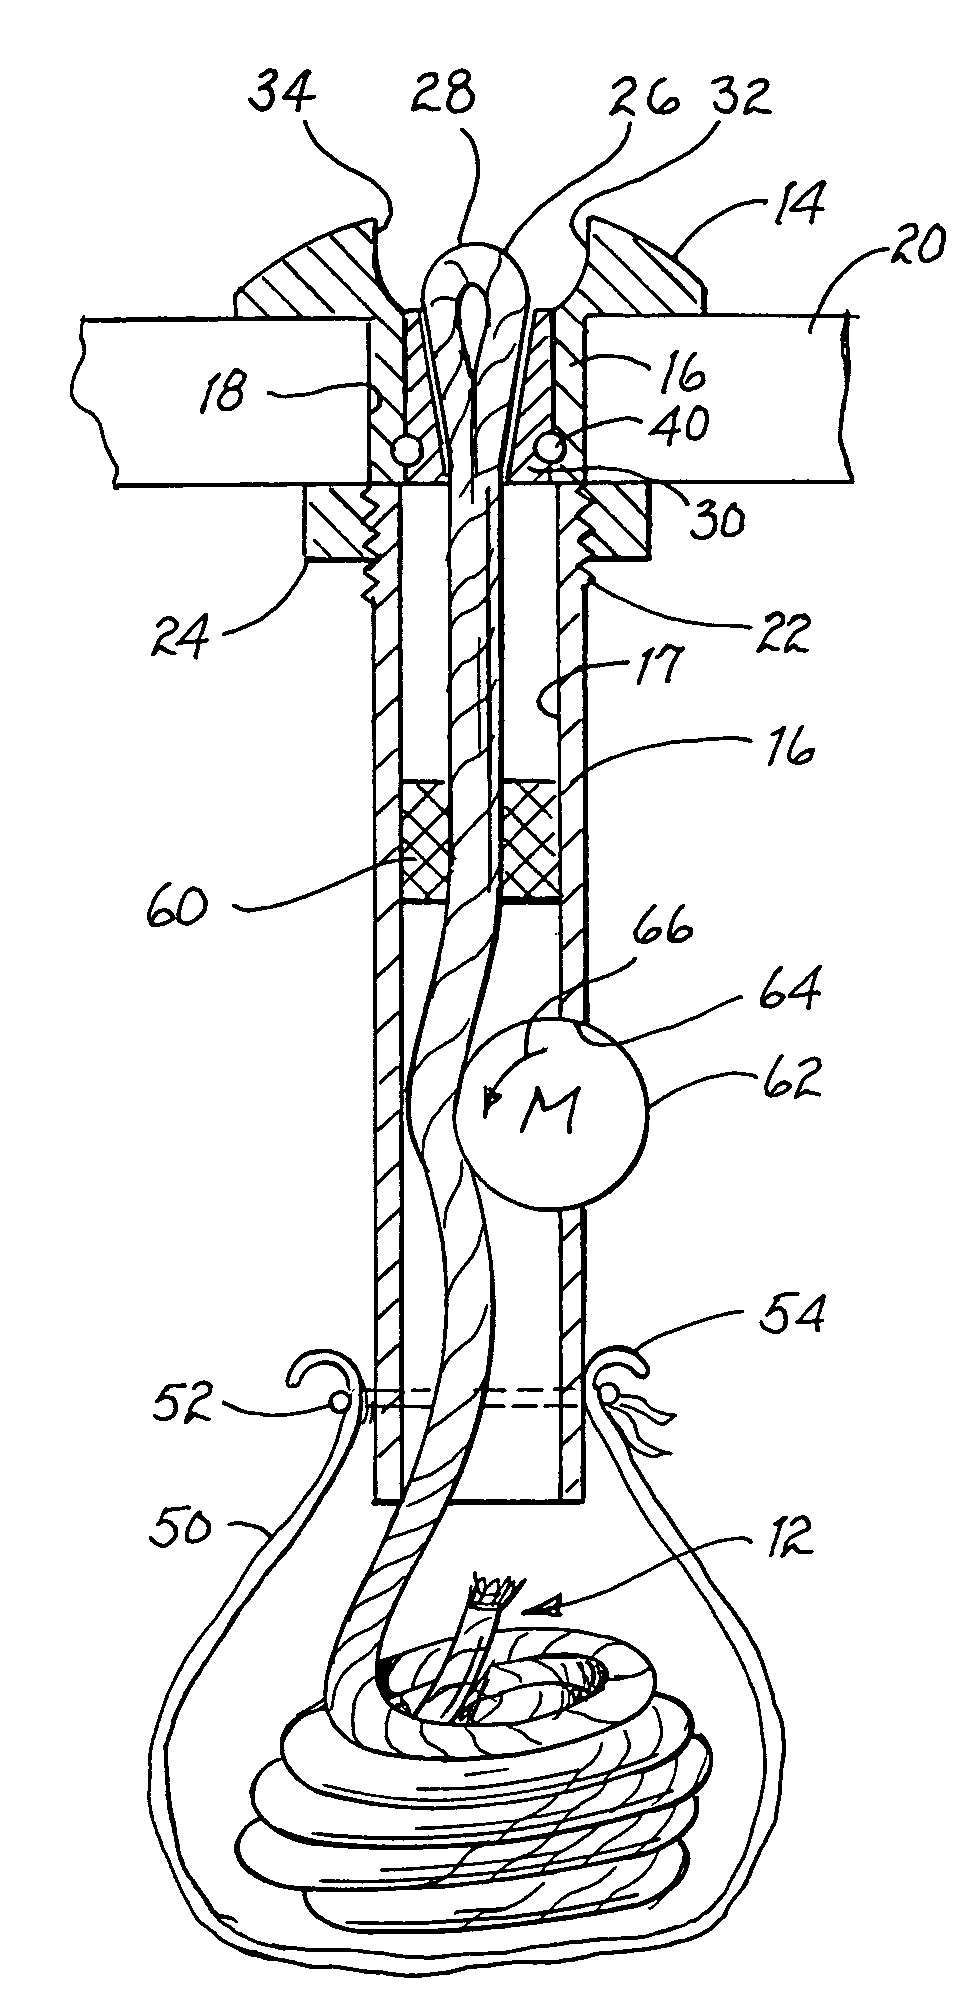 Mooring line retracting/extracting fitting